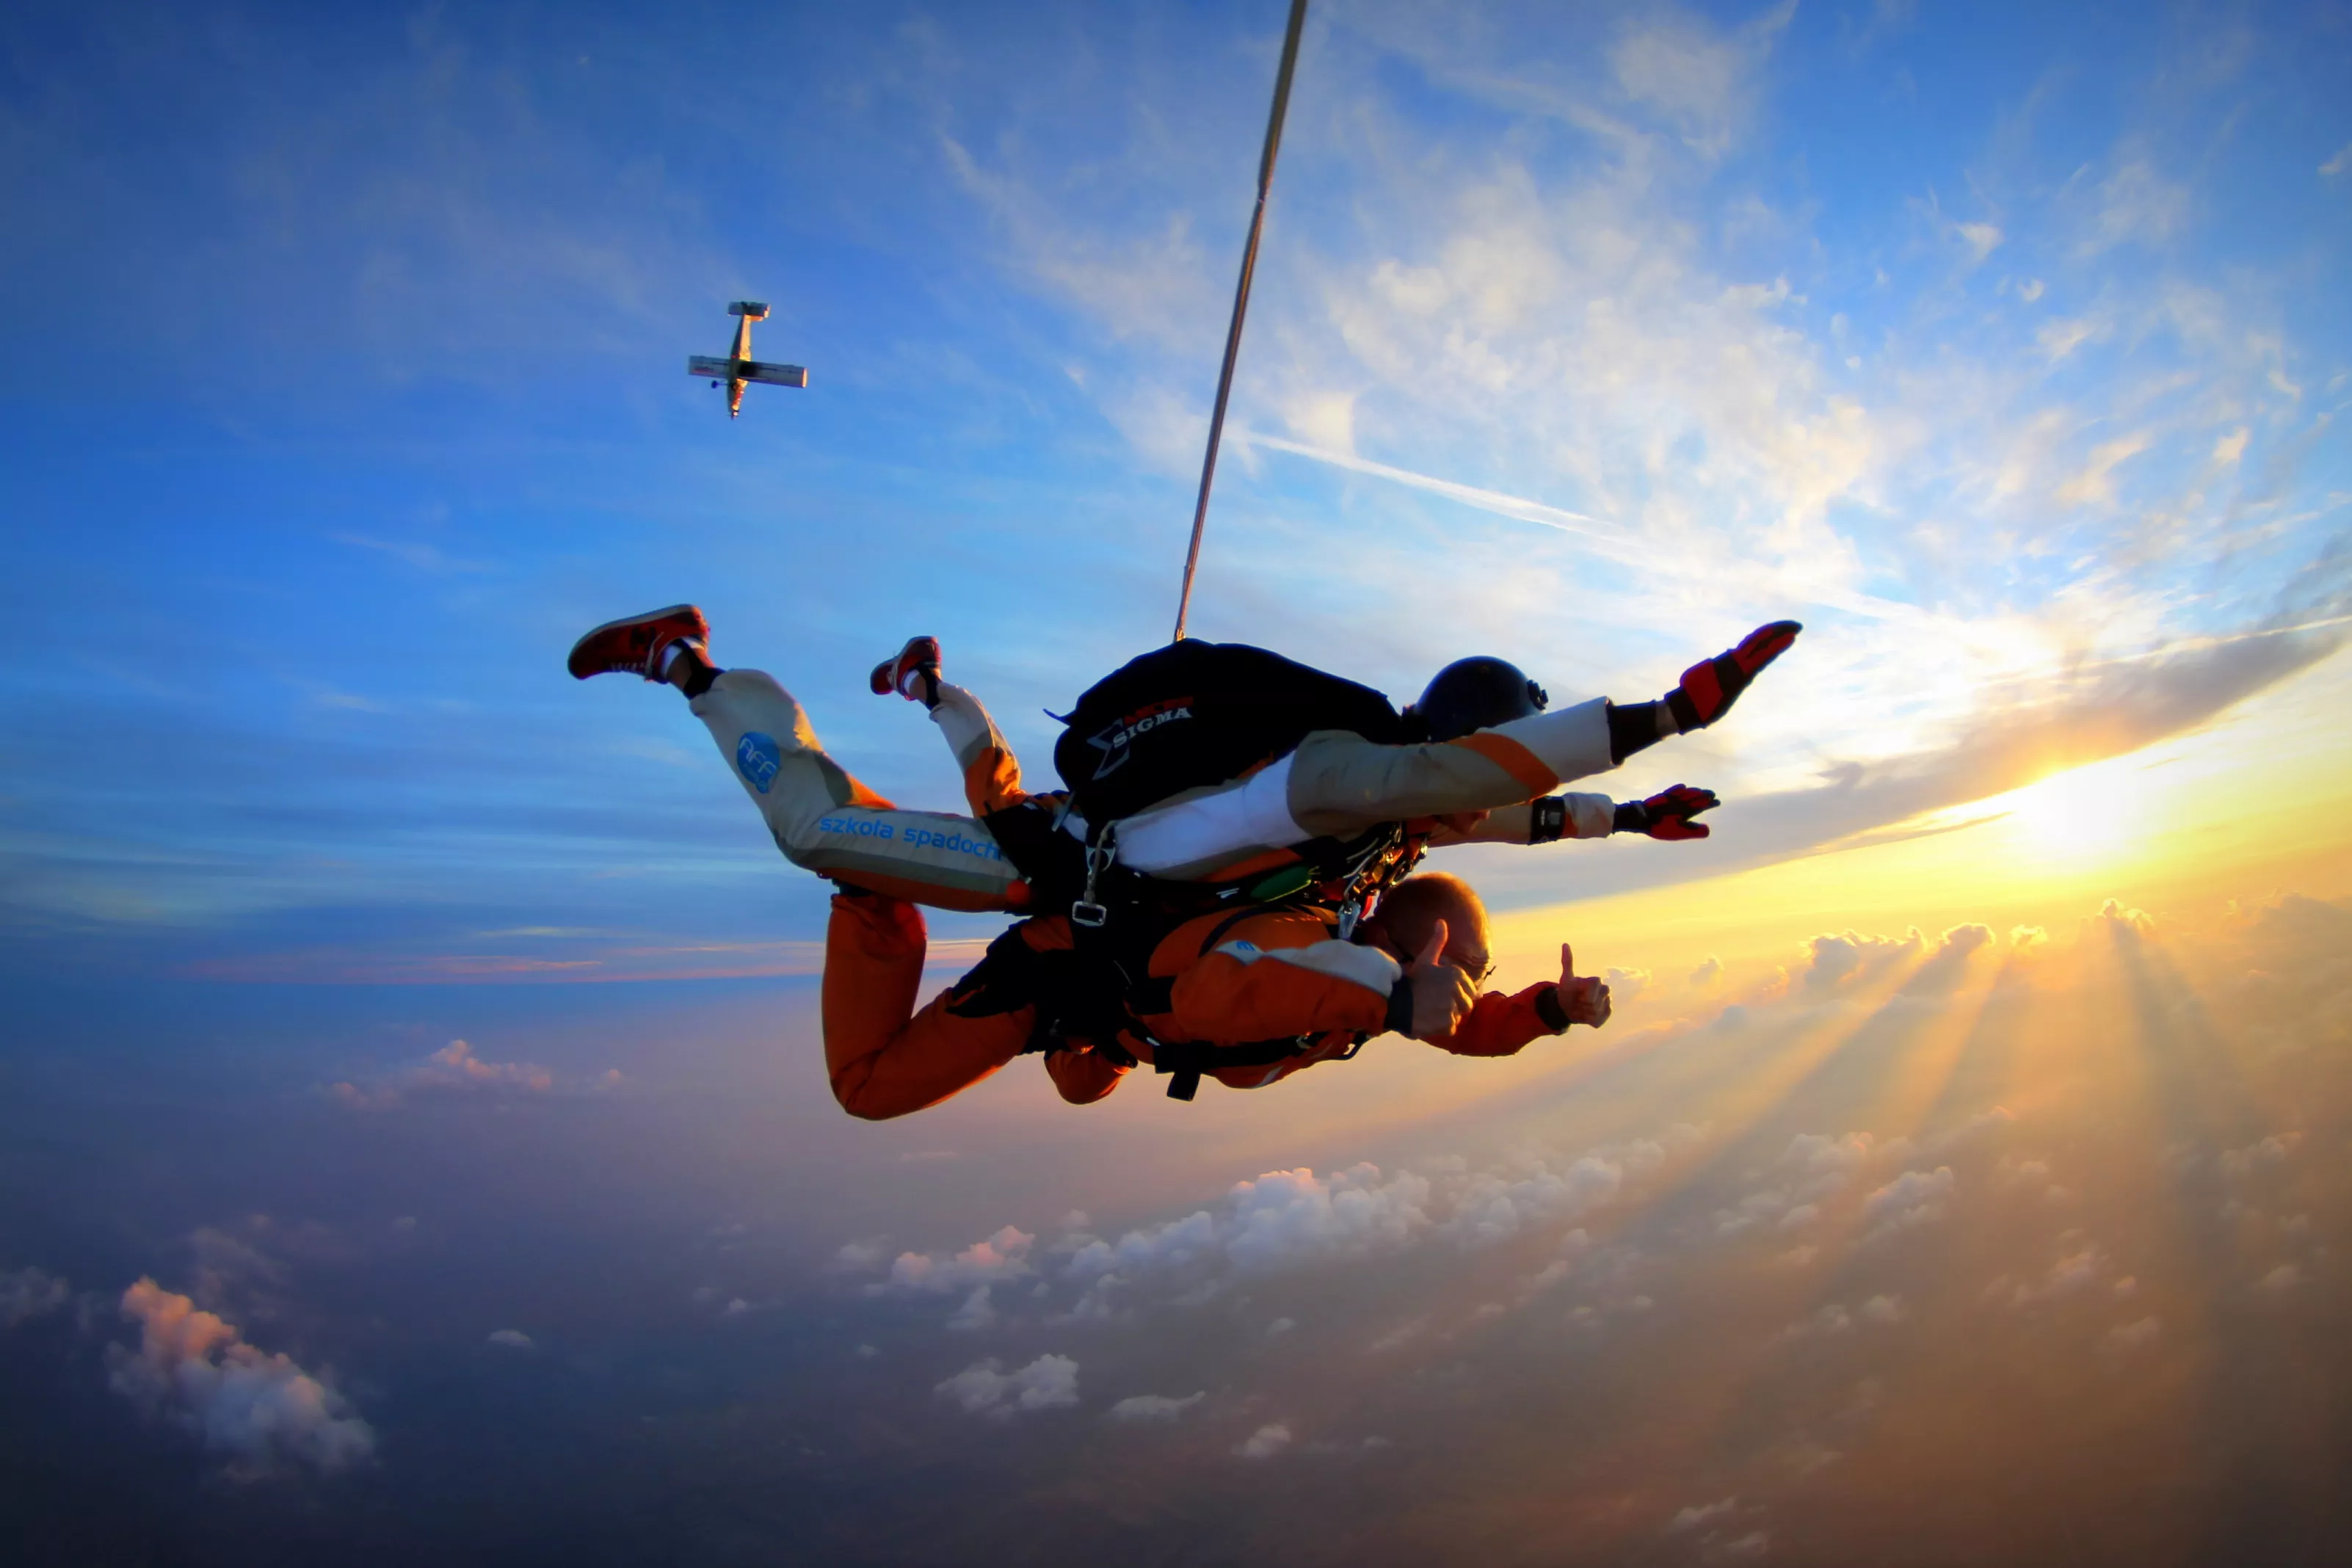 Skydive Sunrise in Italy, Europe | Skydiving - Rated 1